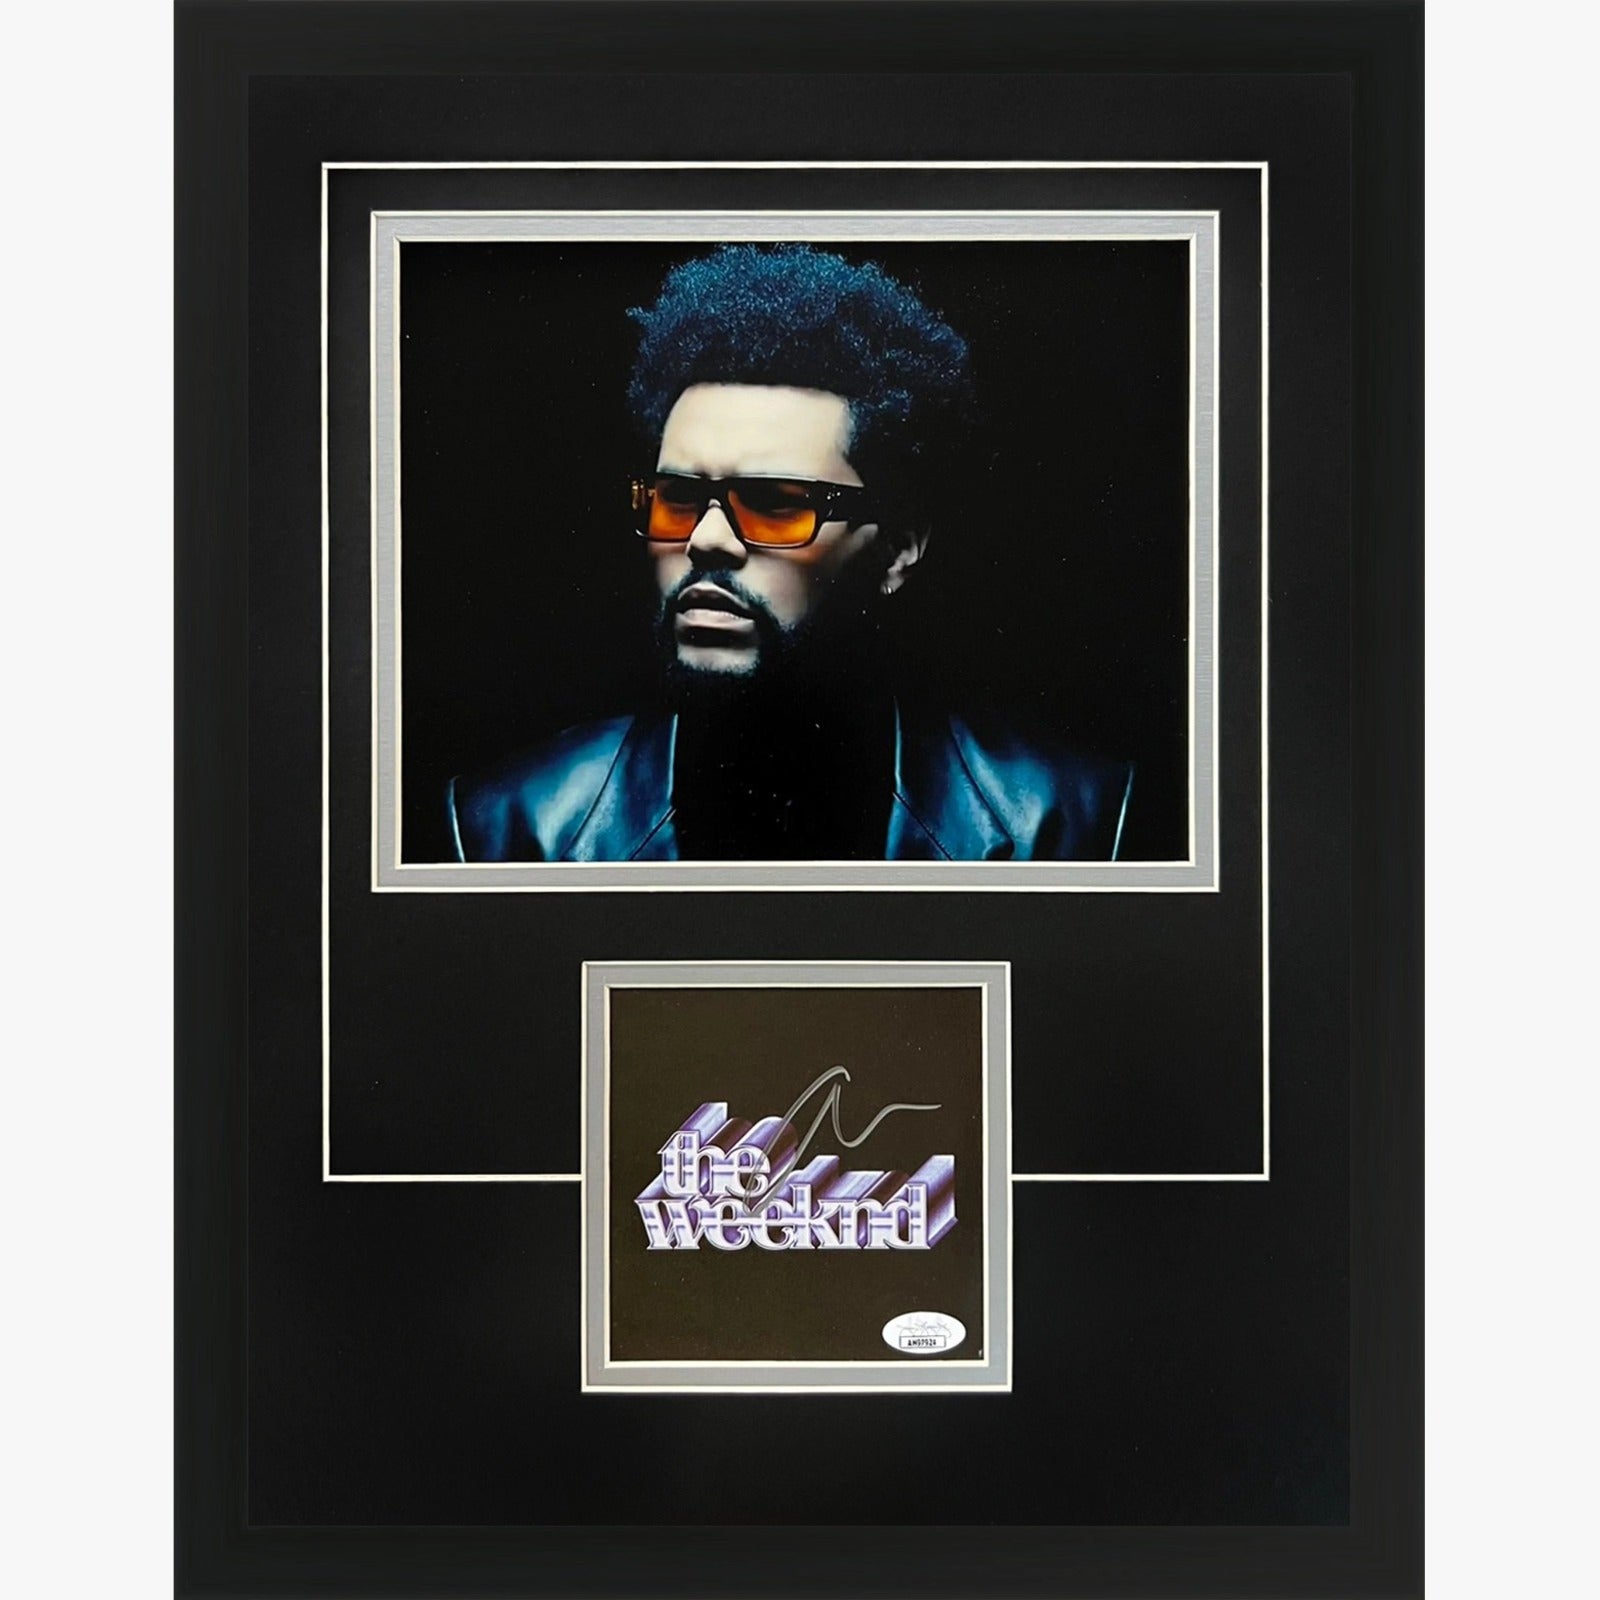 The Weeknd Autographed Dawn FM Deluxe Framed CD and Cover - JSA